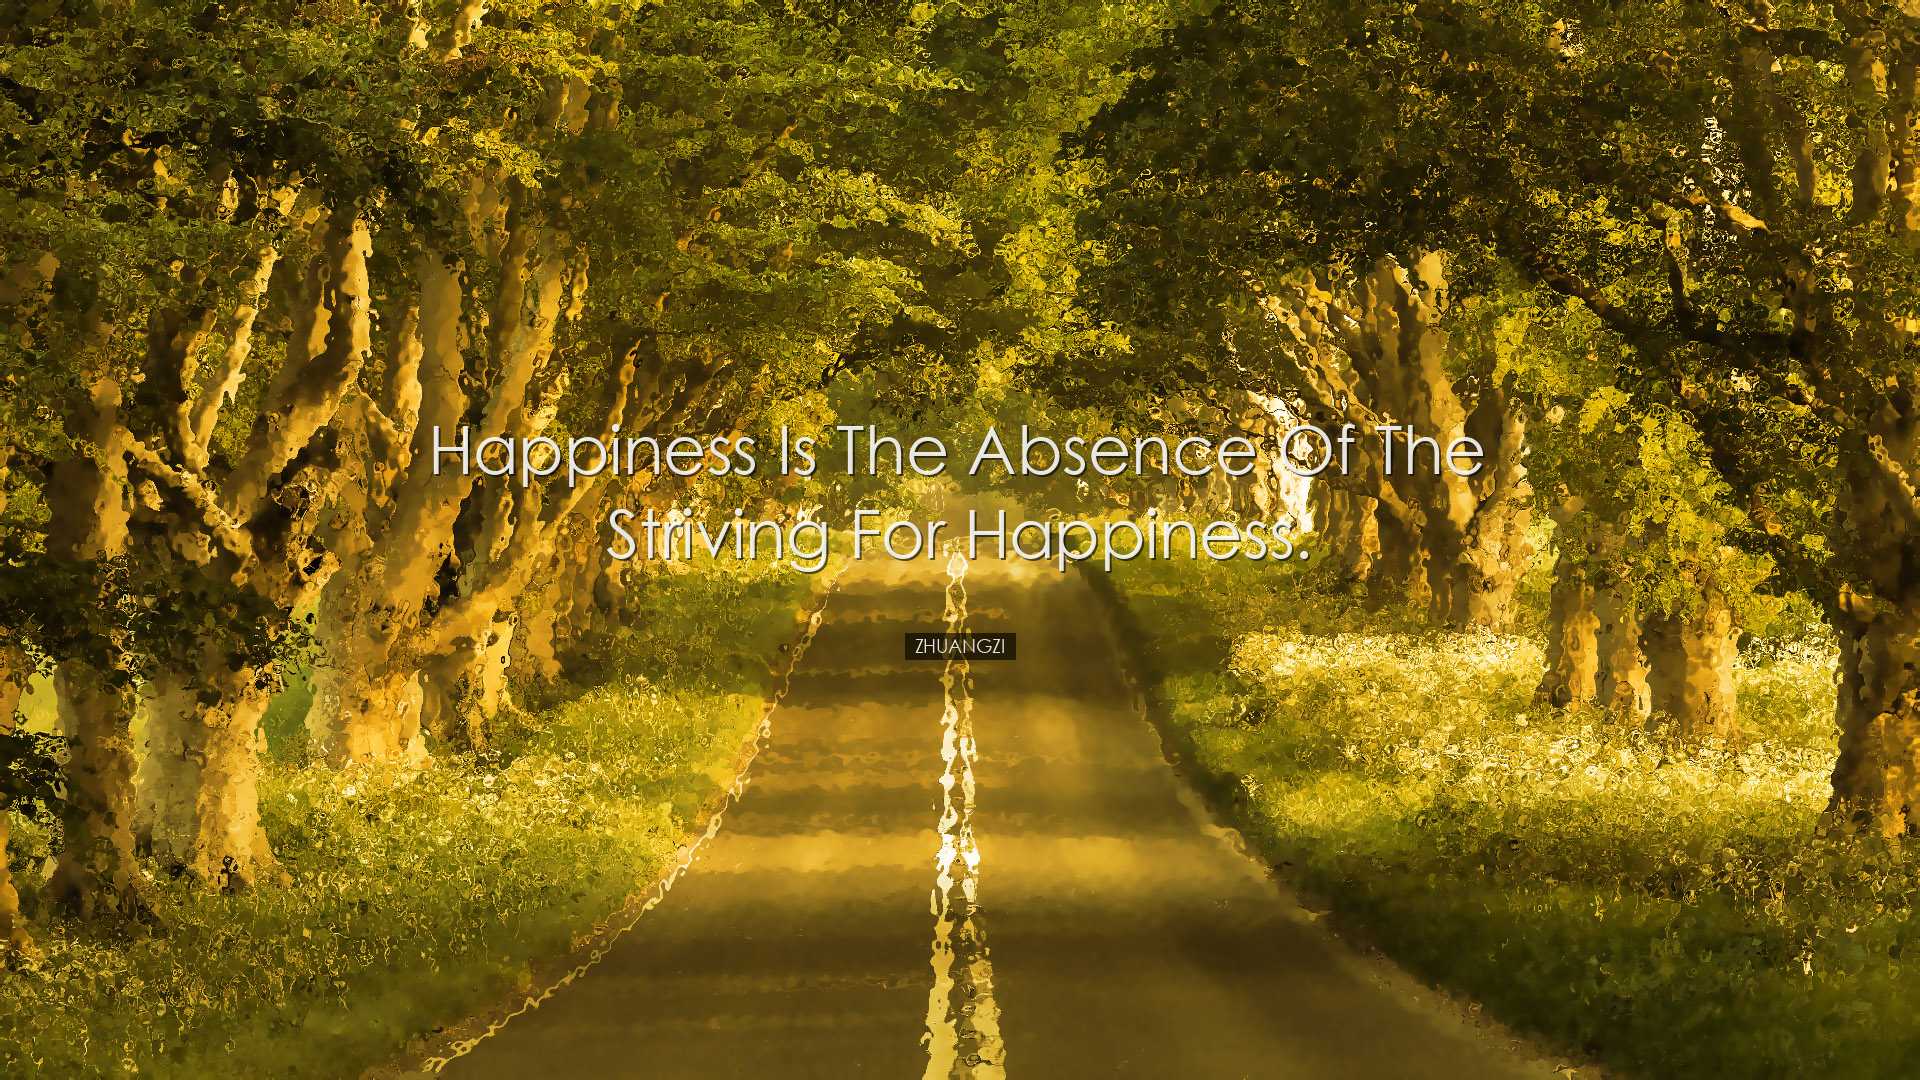 Happiness is the absence of the striving for happiness. - Zhuangzi